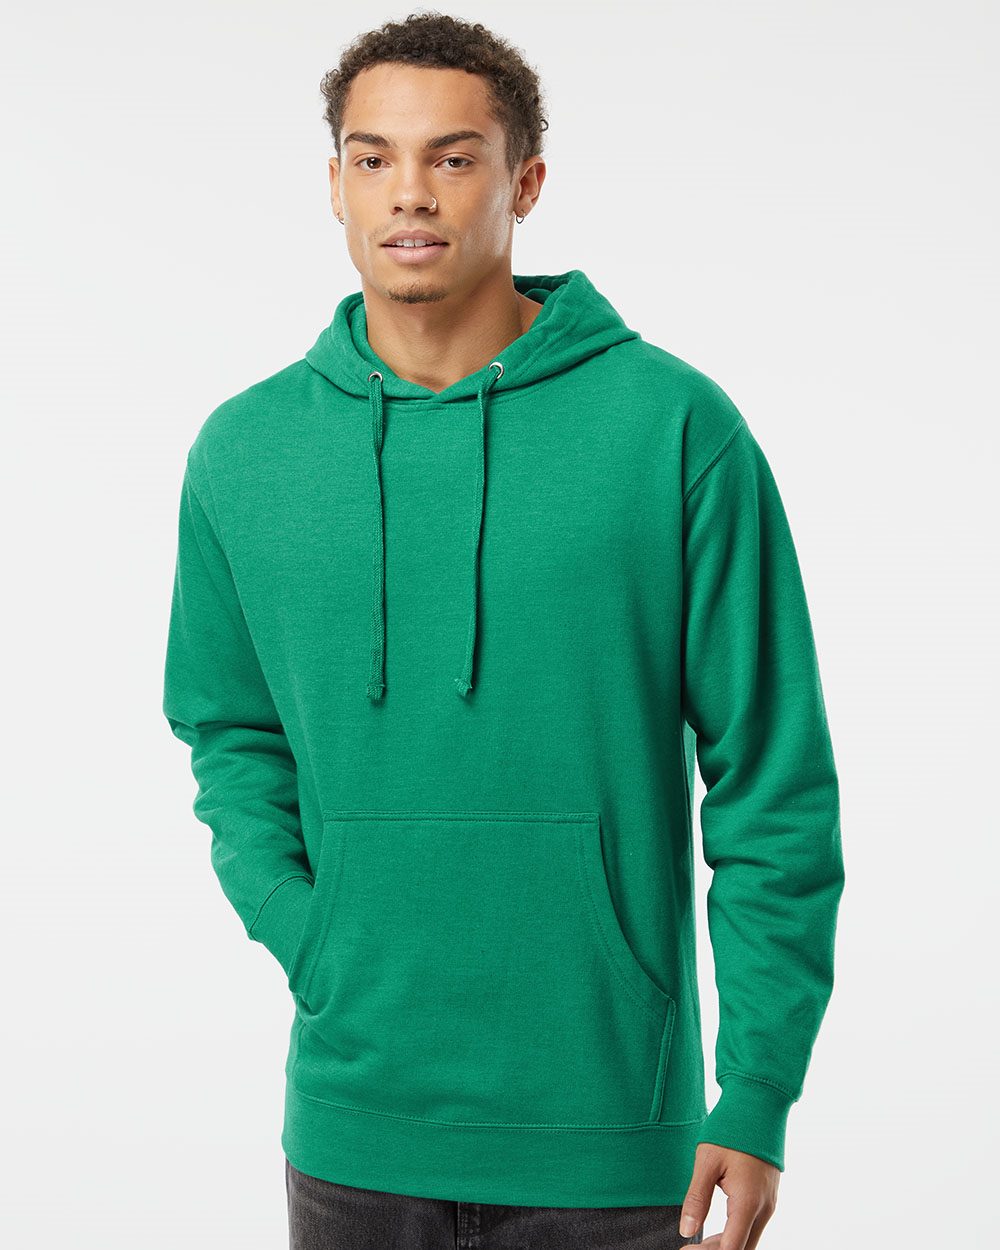 Midweight Hooded Sweatshirt - Independent Trading Co. SS4500